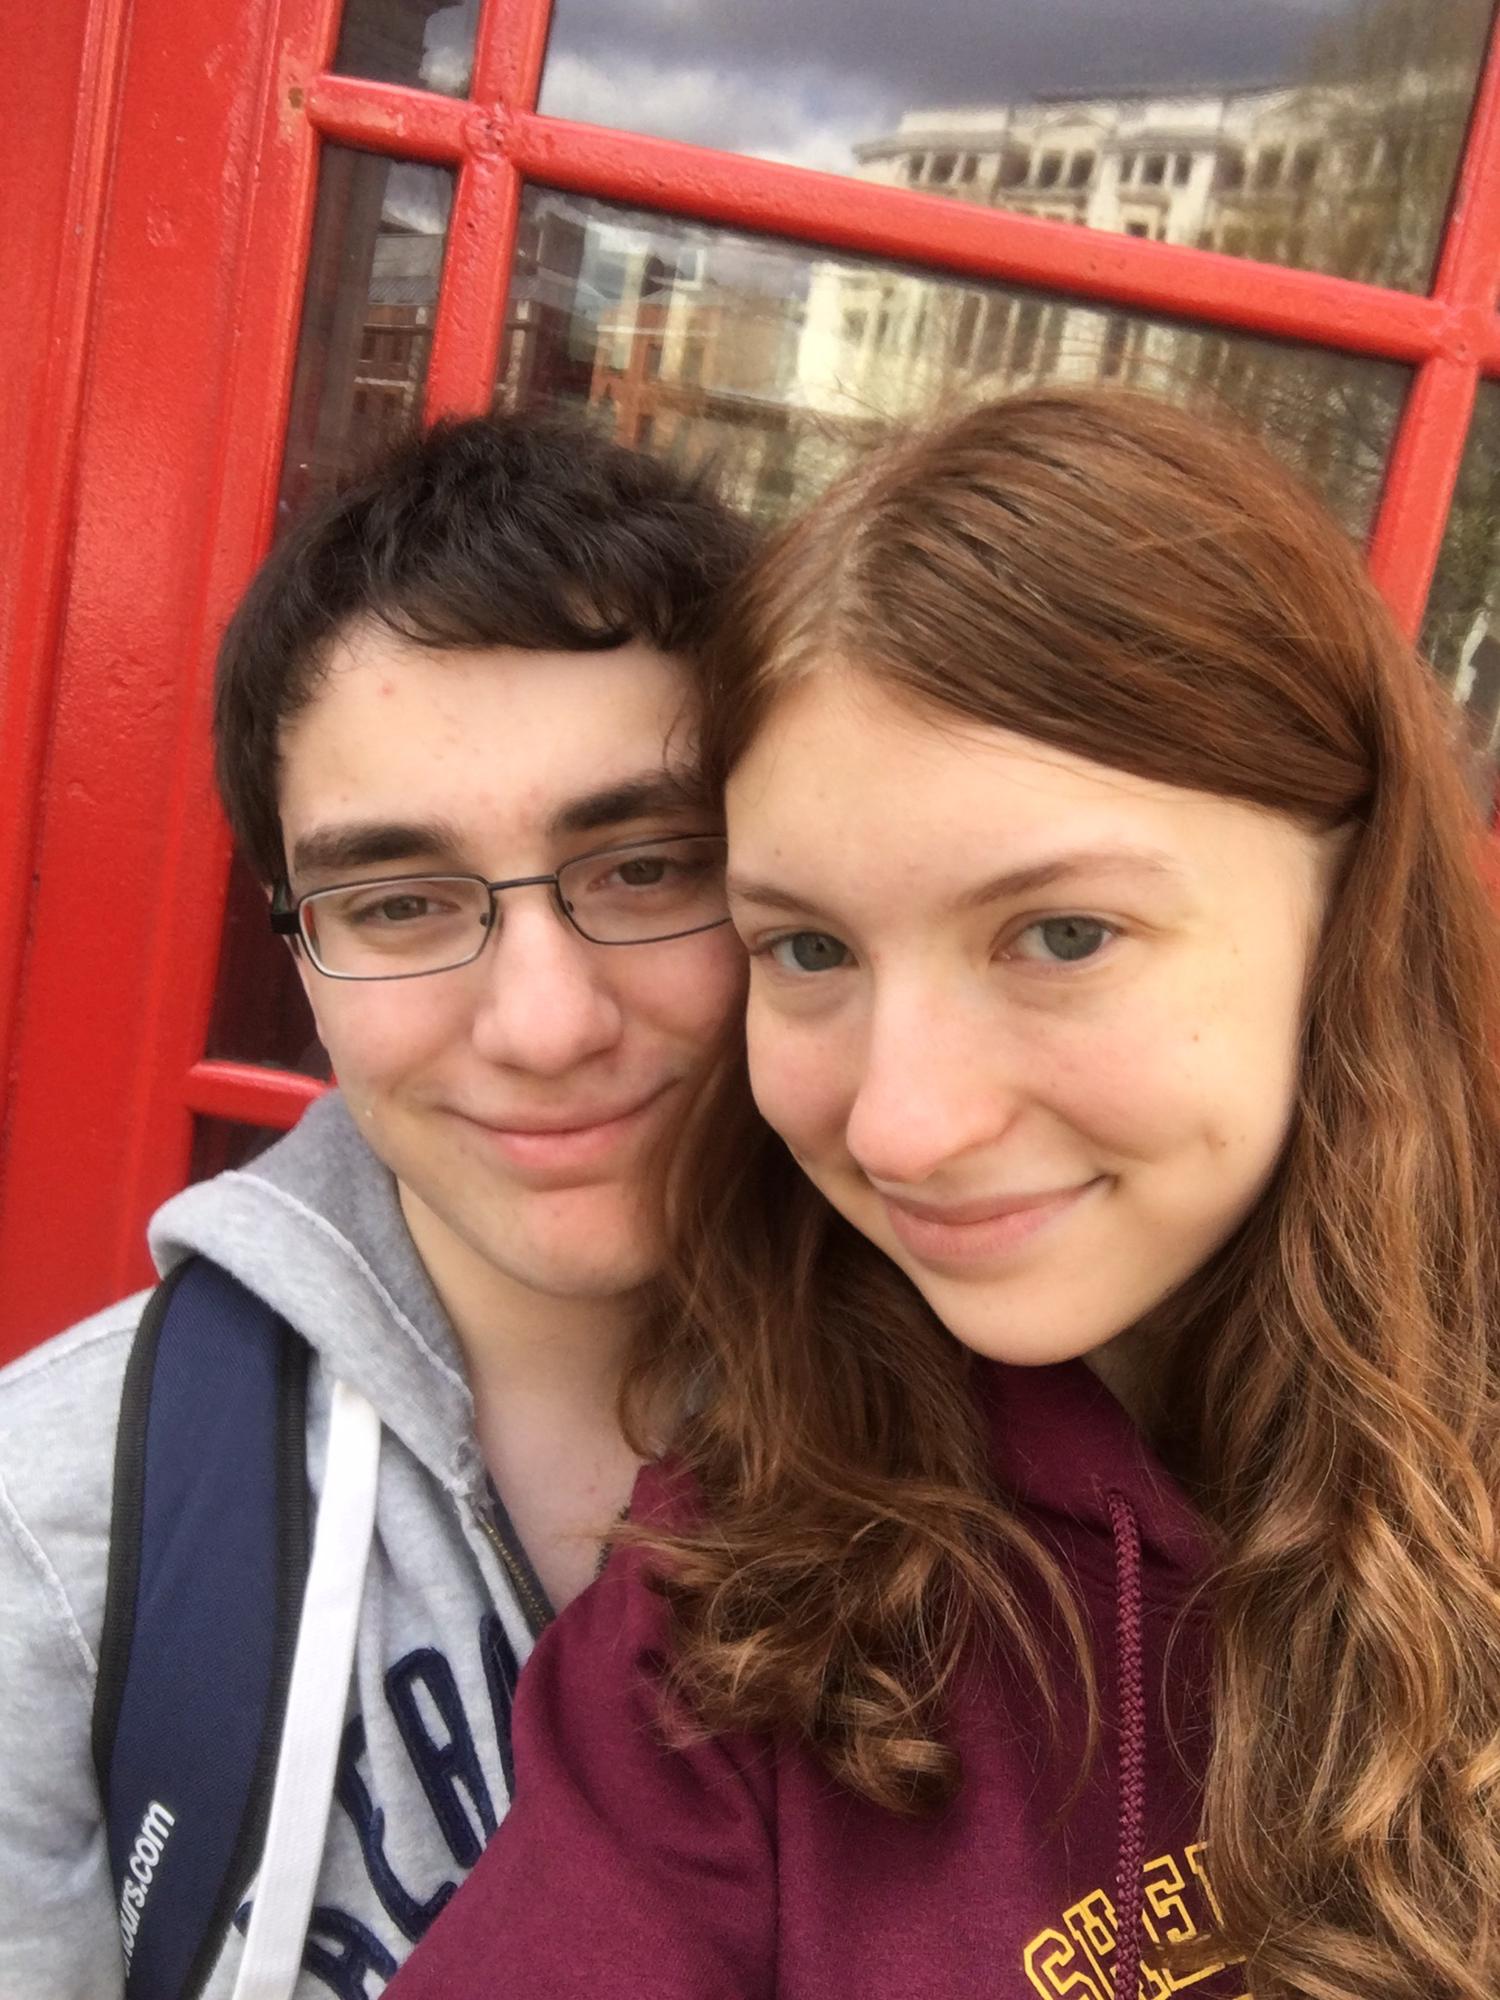 April 17th, 2016: We found a classic telephone booth in London.